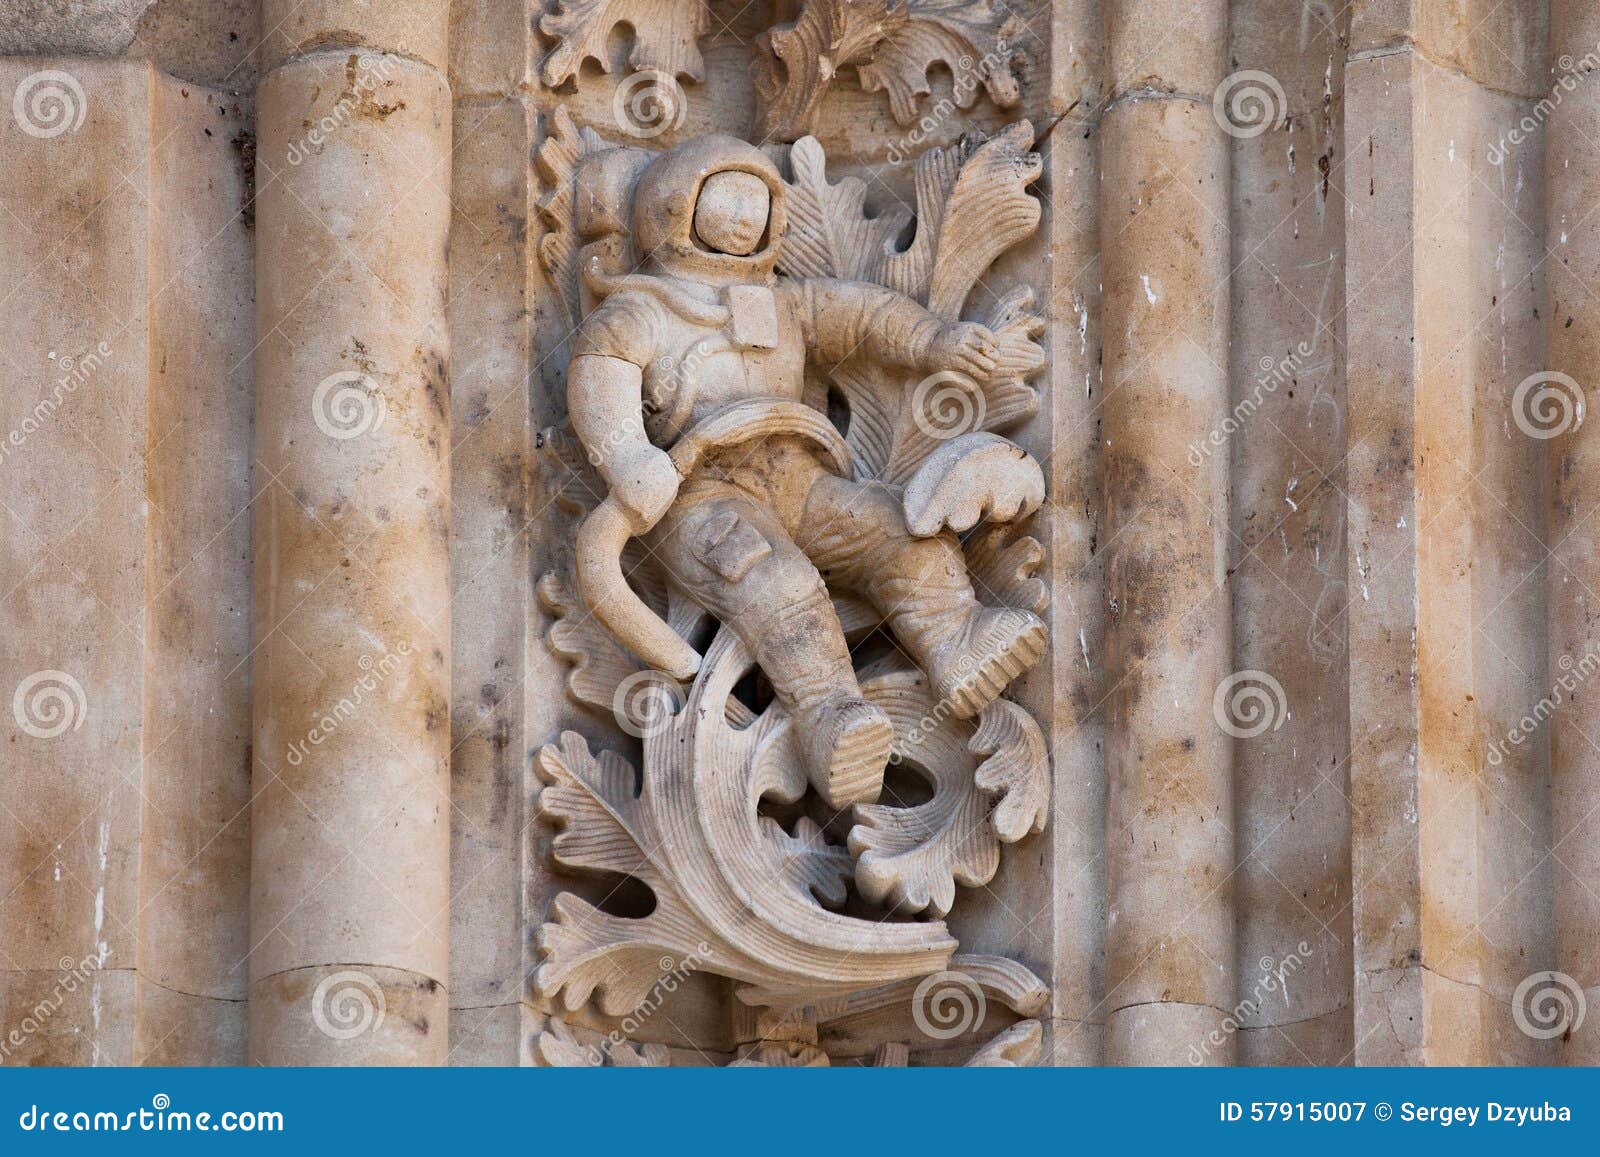 astronaut carved in stone in the salamanca cathedral facade